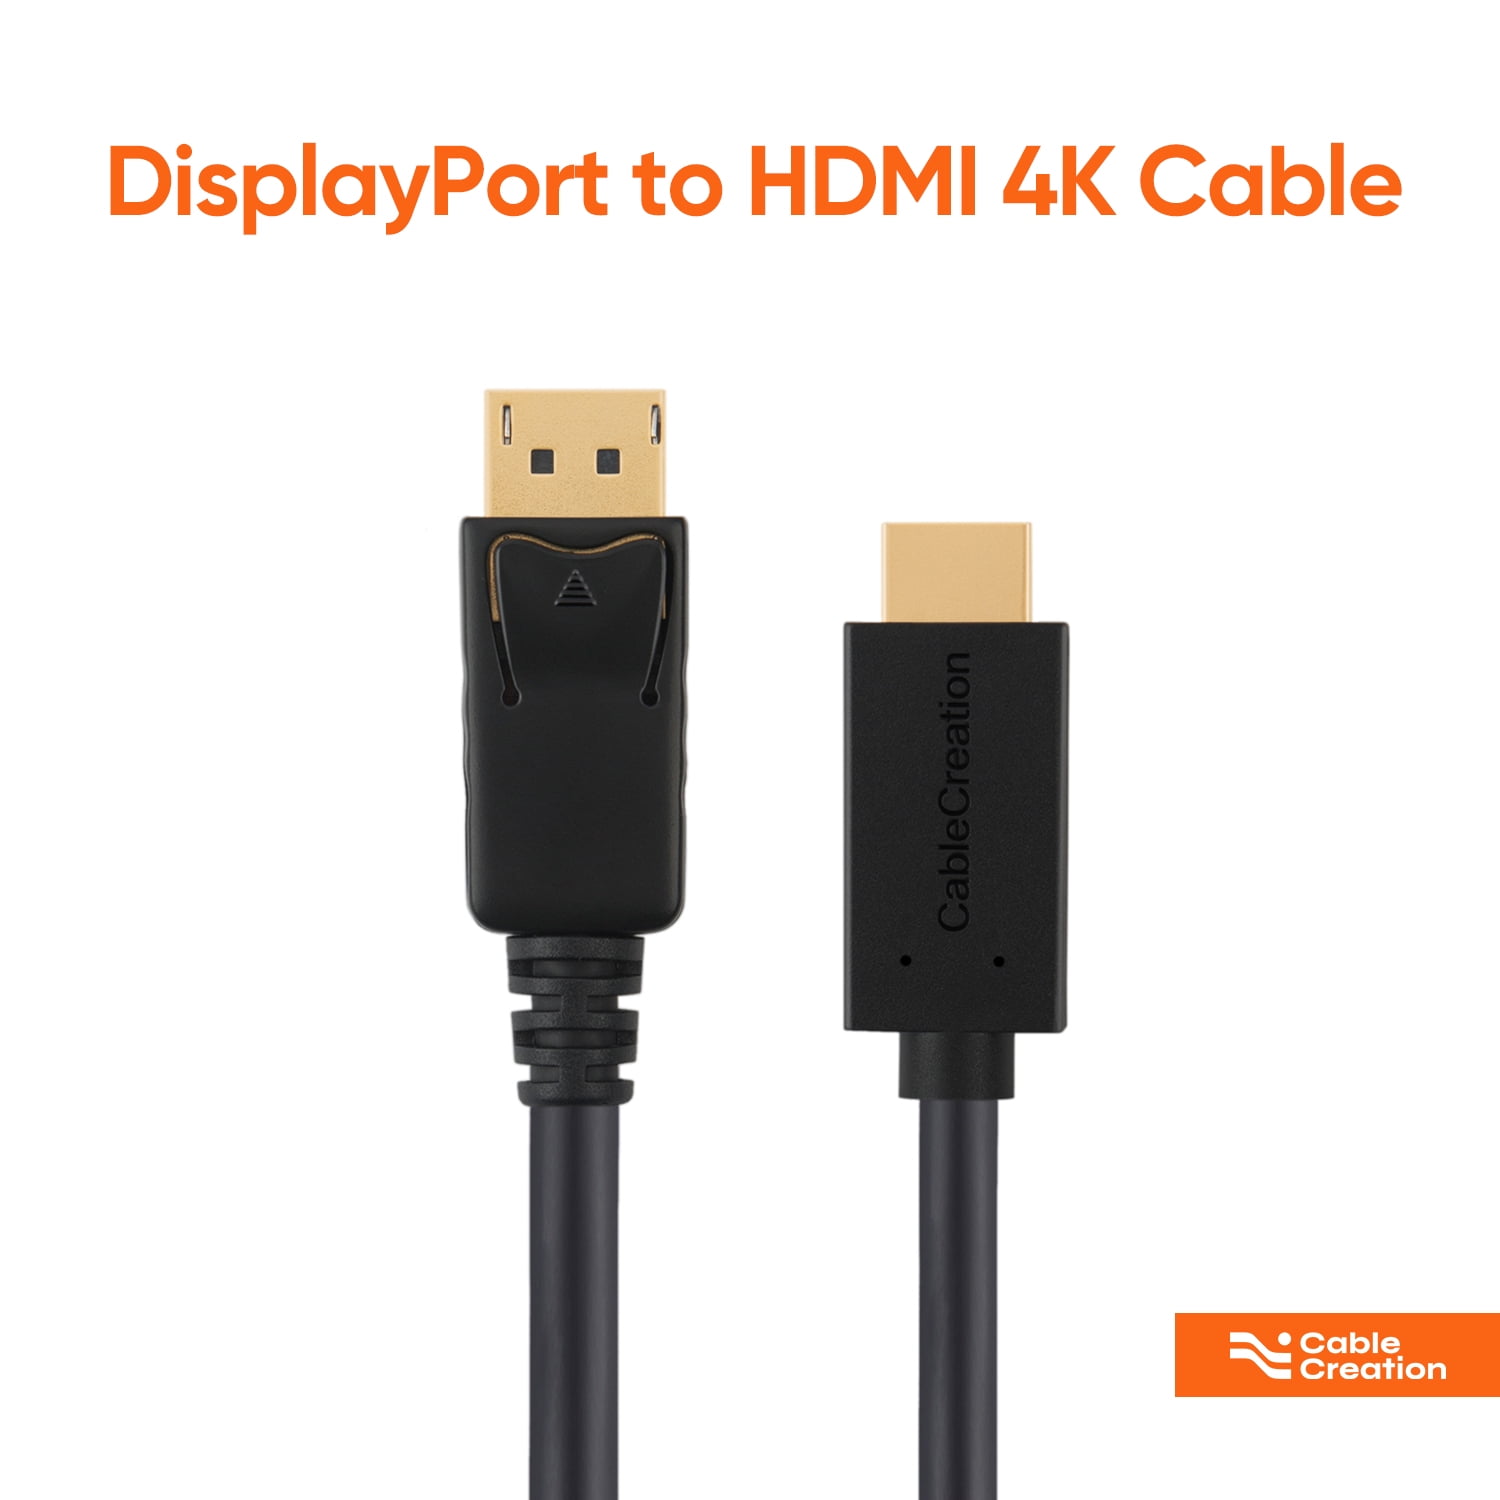 2Pack-4K Active Displayport to HDMI Cable 6ft, CableCreation DP to HDMI 1.2 4K x & 3D Audio/Video Monitor Cable,Support Multi-Screen for Desktop/Monitor/Projector/Graphics Card/VR - Walmart.com